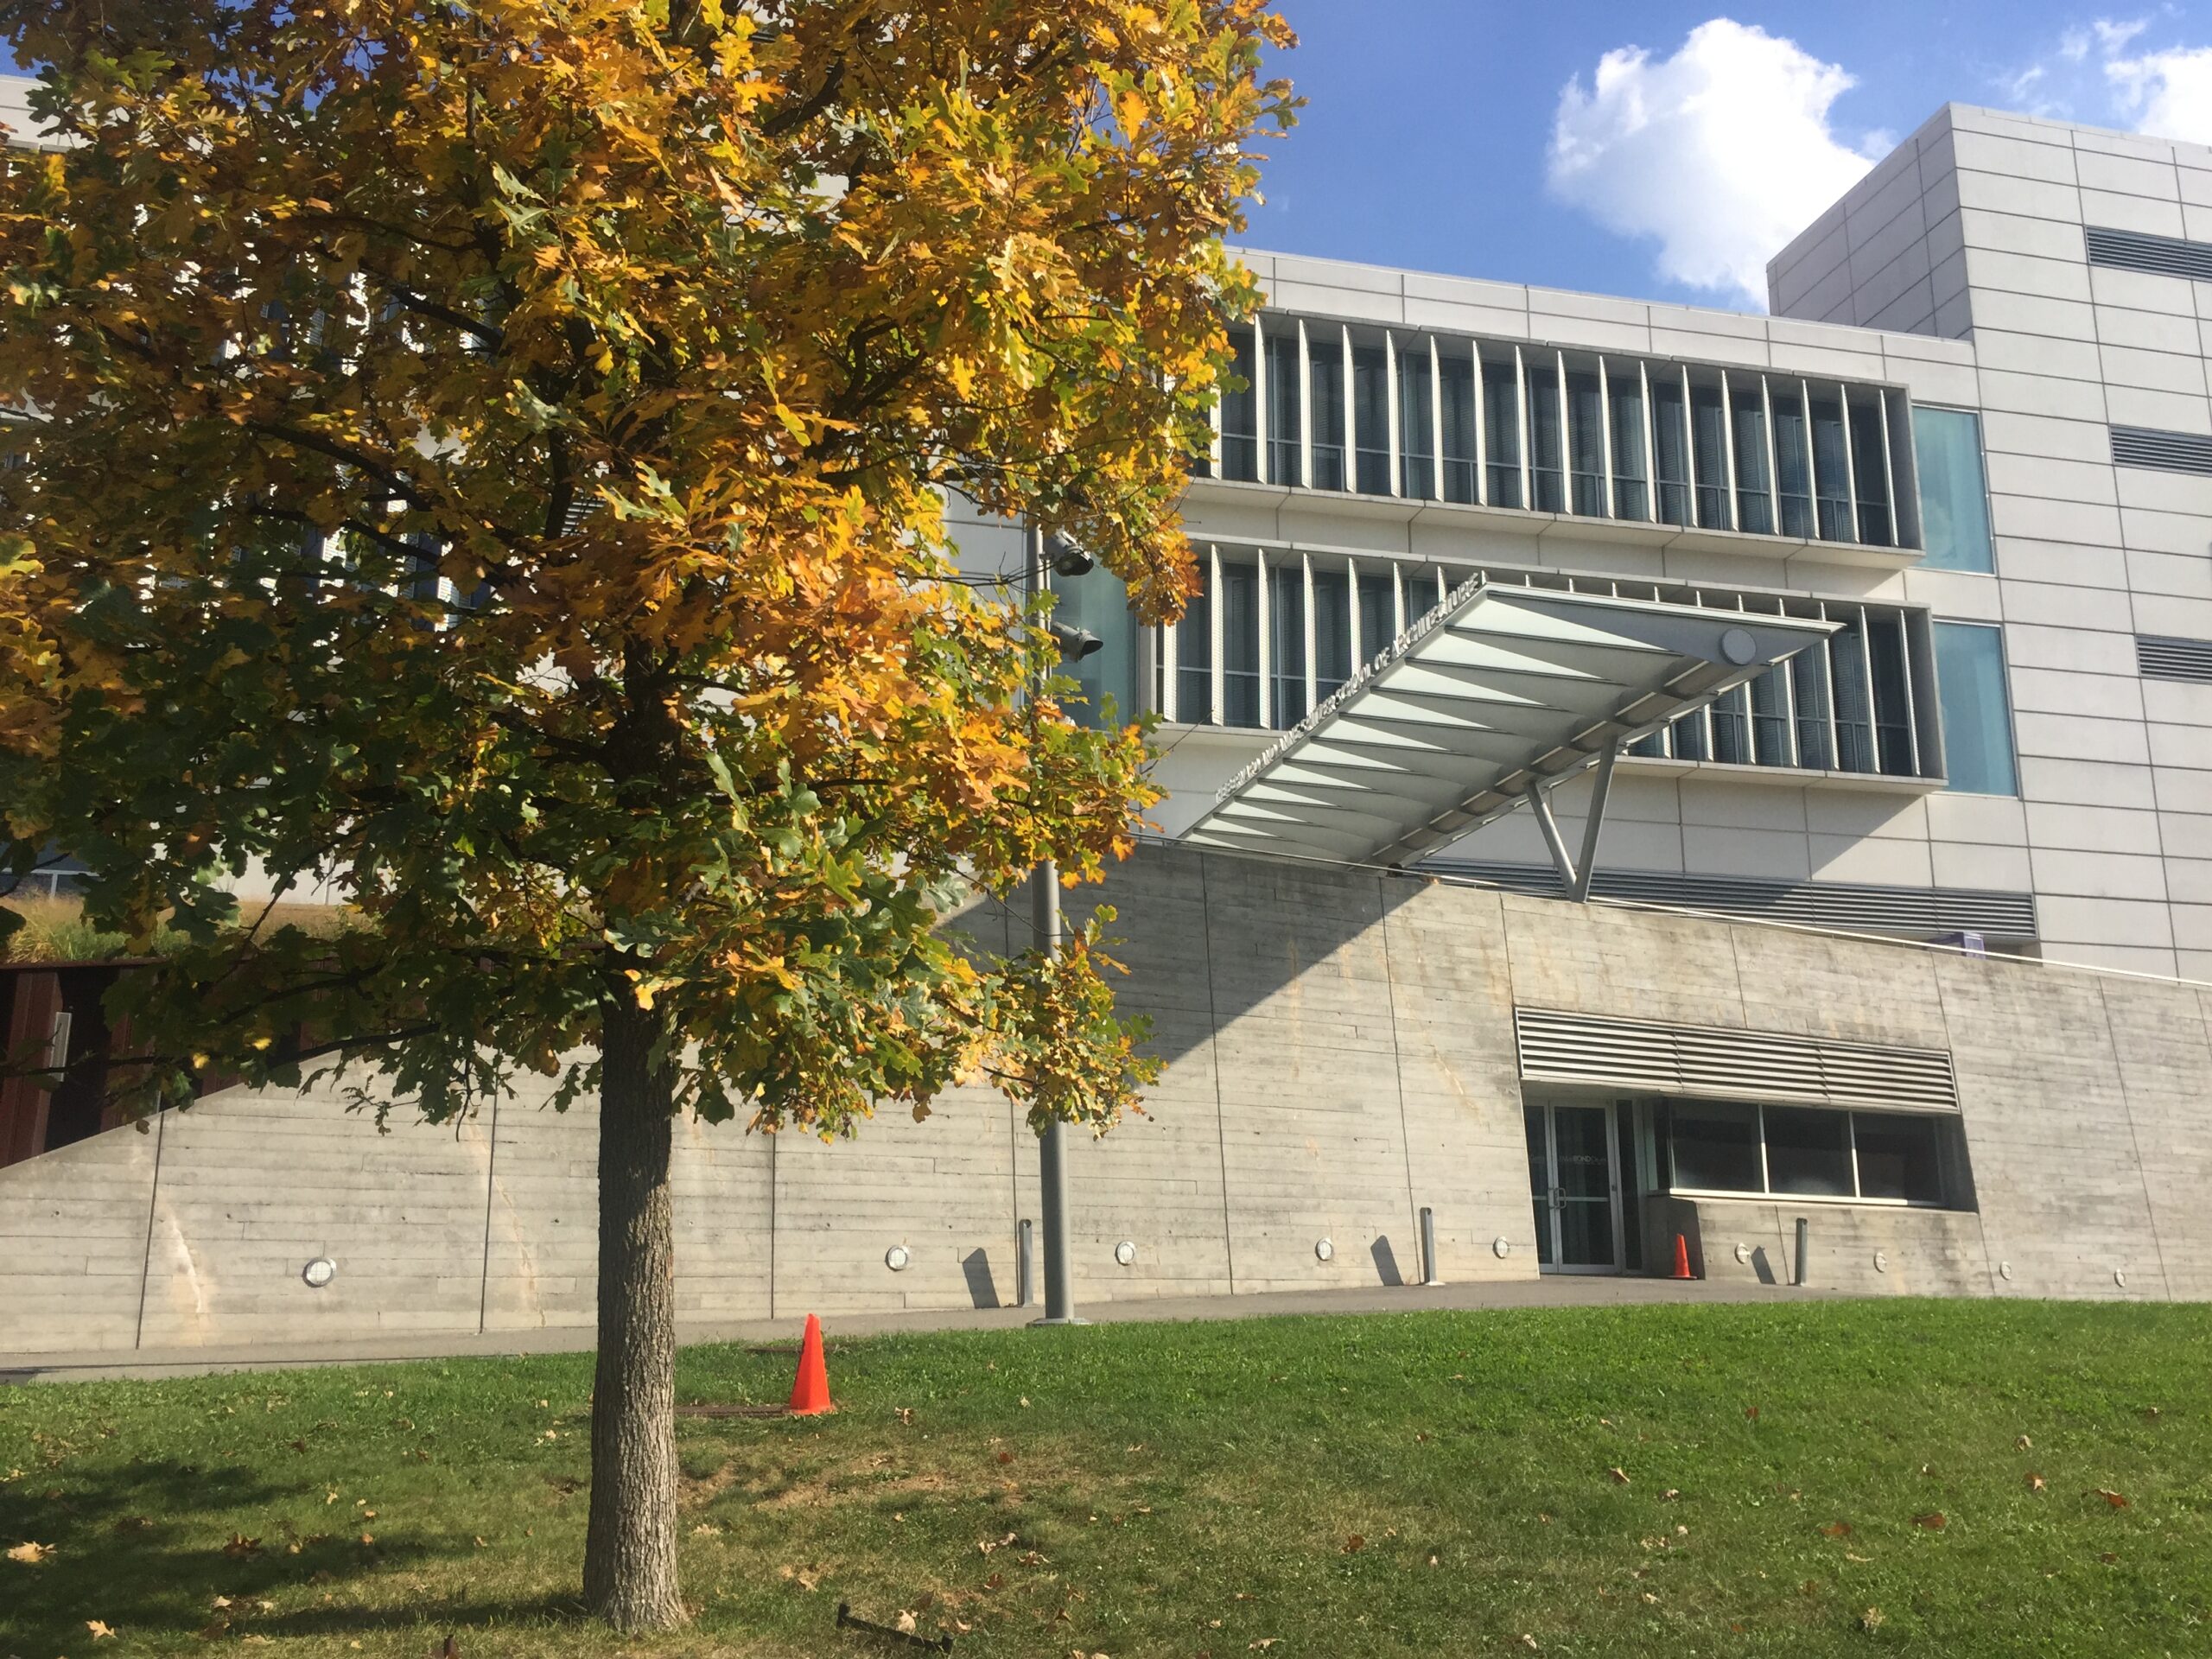 Photograph of tree, grass field, and the Spitzer School of Architecture building.